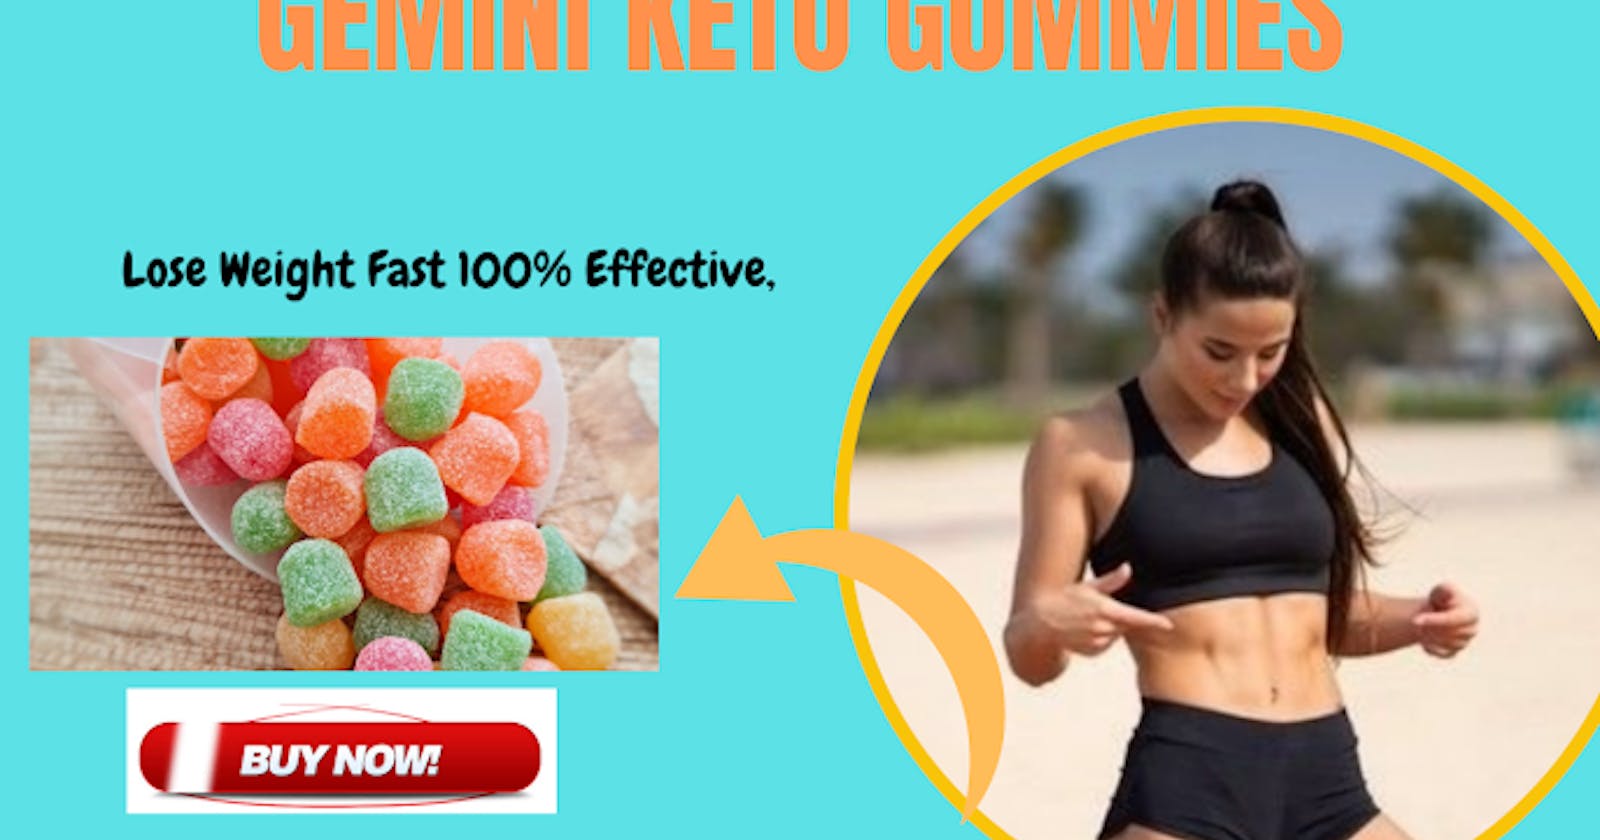 Gemini Keto Gummies: The Ultimate Low-Carb Treat for Busy People